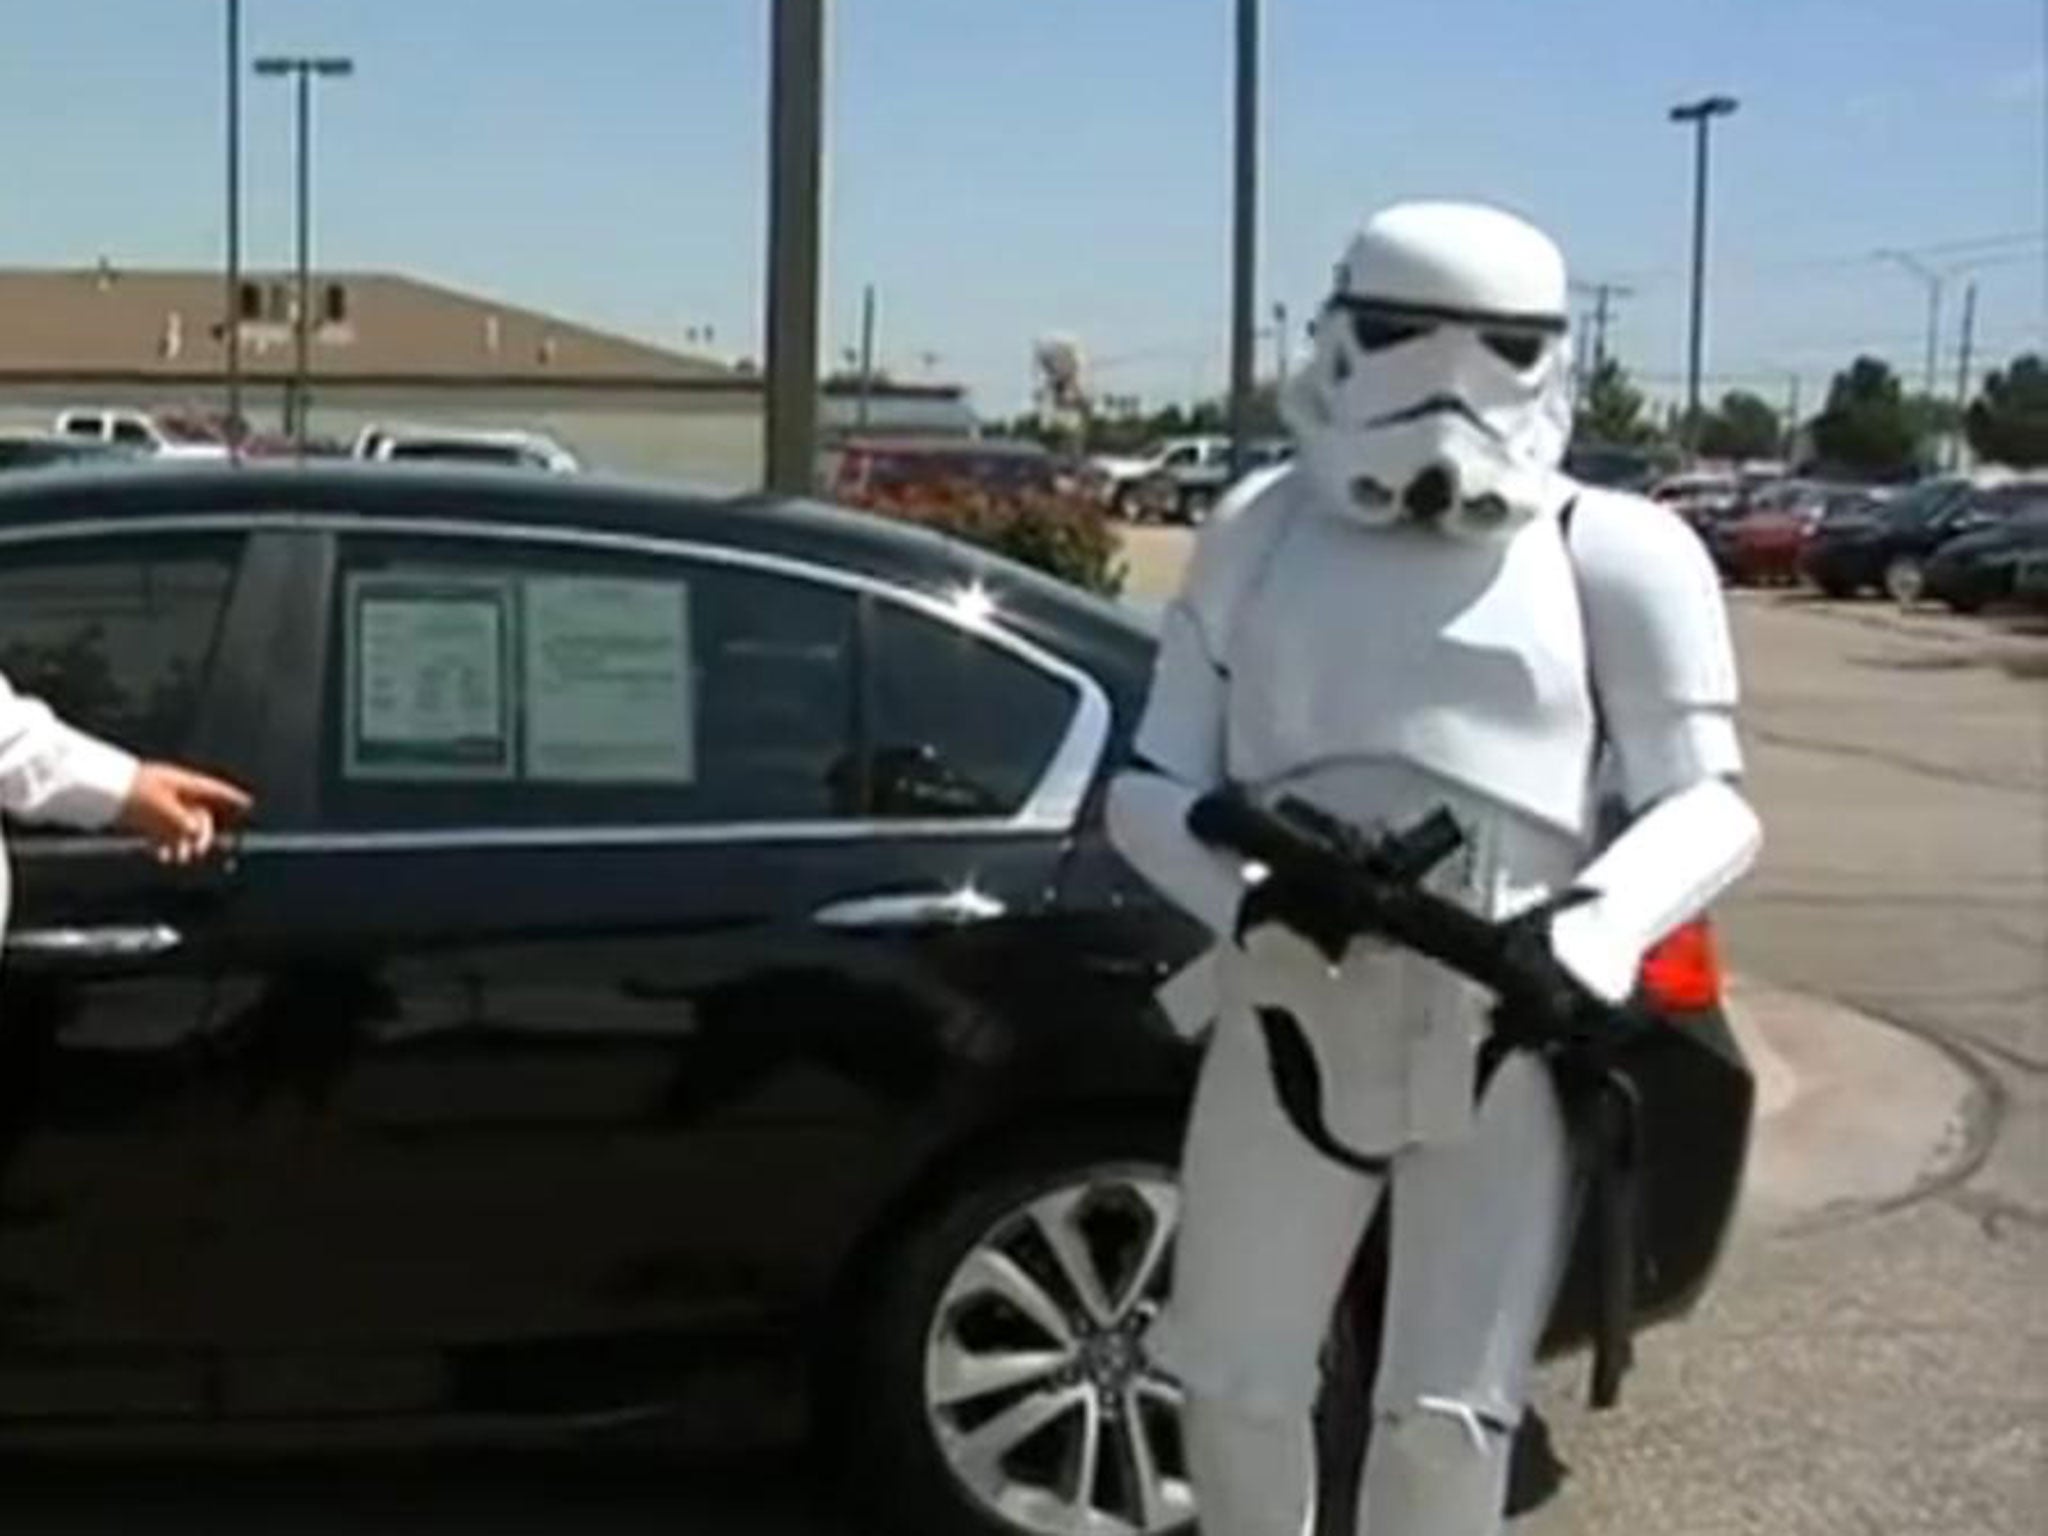 A man dressed as a Star Wars storm trooper prompted a lock down in Salina, Kansas on Tuesday, local media has reported.